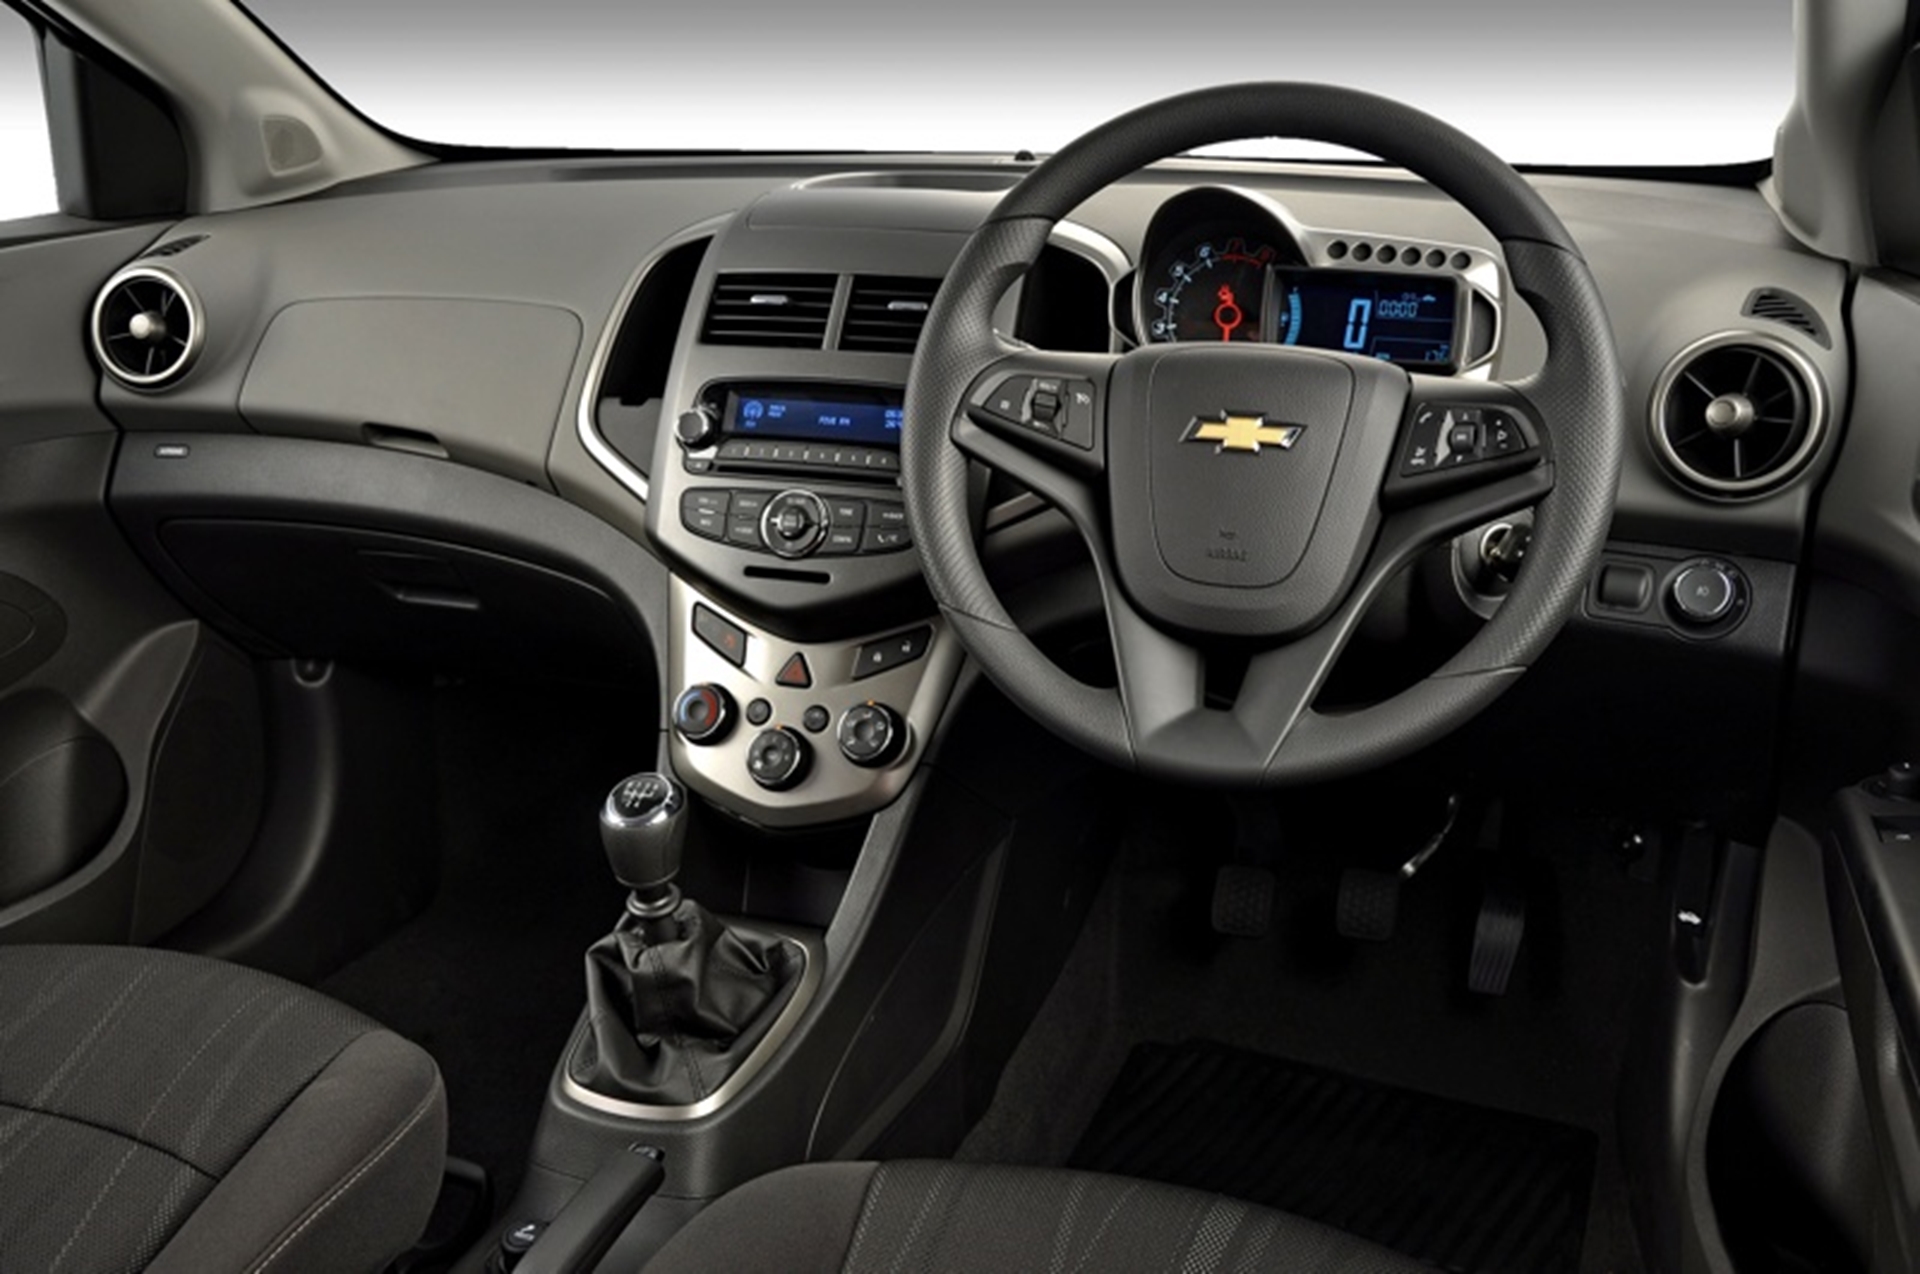 Refinement and detail in execution define new Chevrolet Sonic